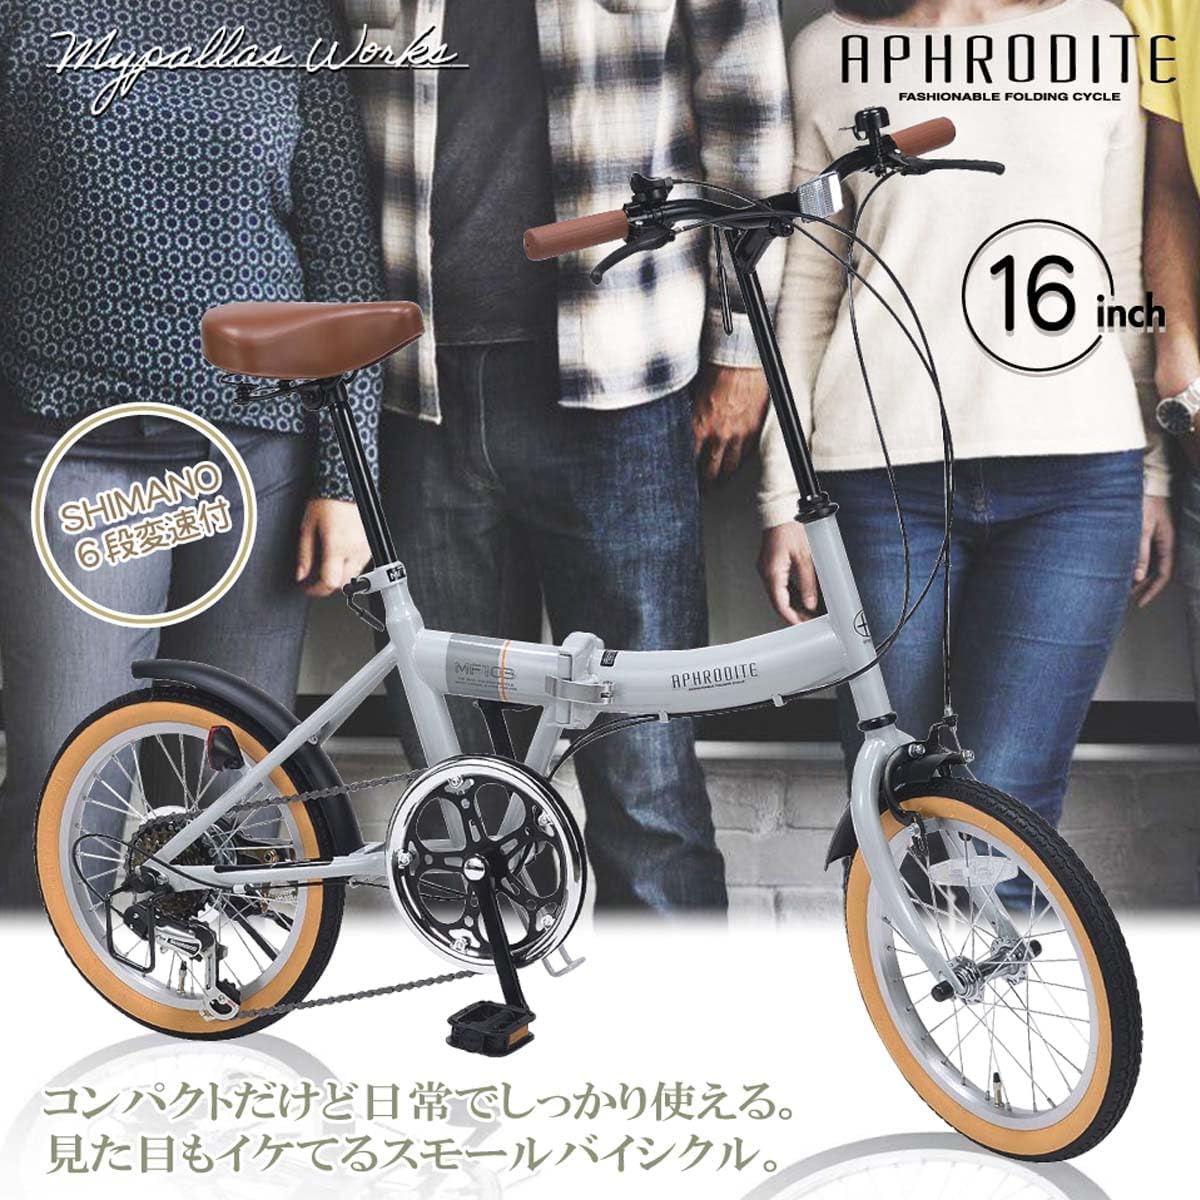  my palas foldable bicycle 16 -inch MF103 gray ju compact stylish small smaller 6 step shifting gears gear [ Honshu only free shipping ]